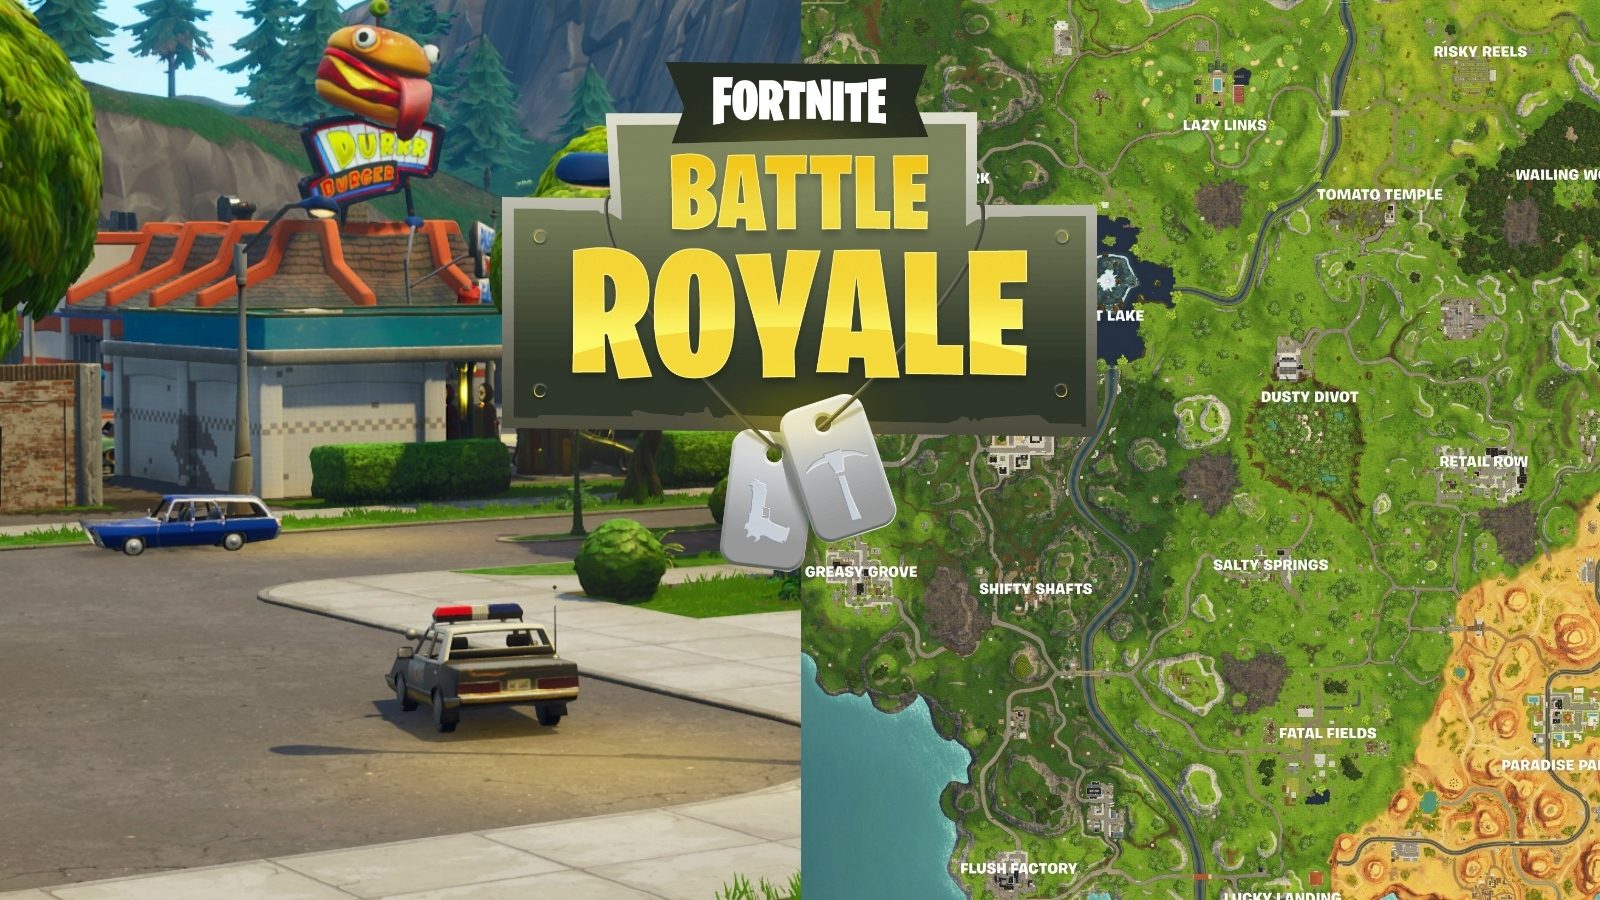 All Fortnite Map Changes In V6 22 Update Soccer Field Durrr Burger Retail Row And More Dexerto